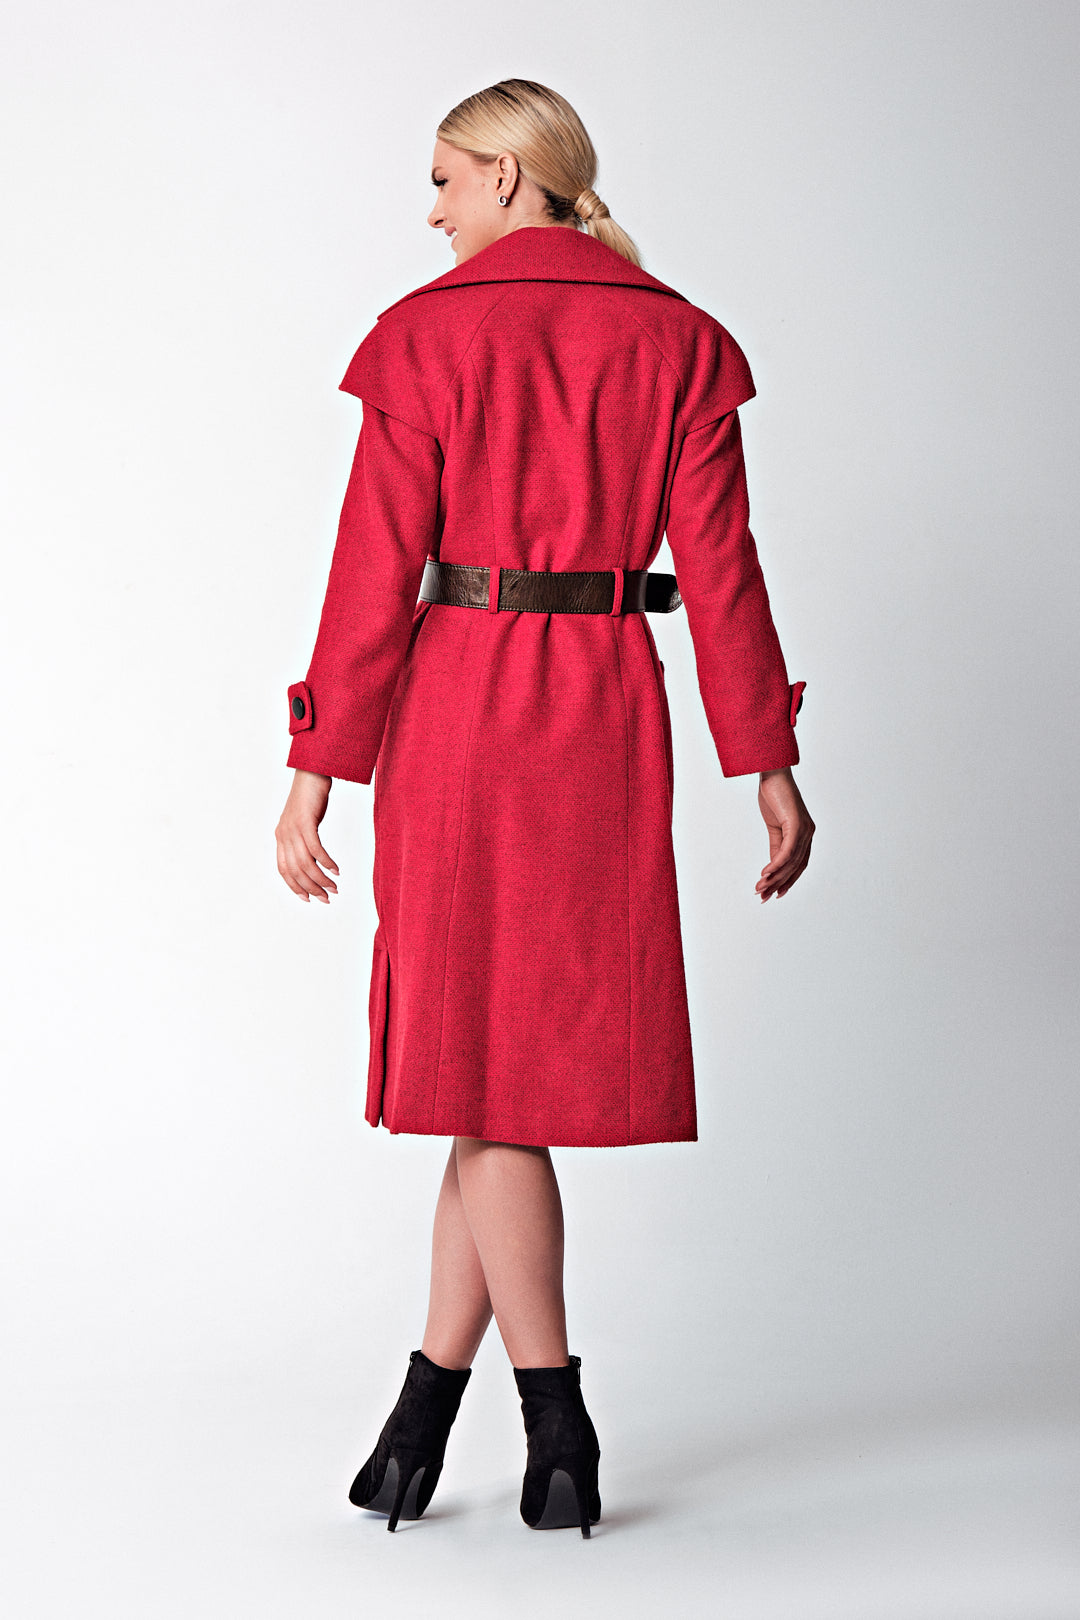 The red coat | wool with fur details